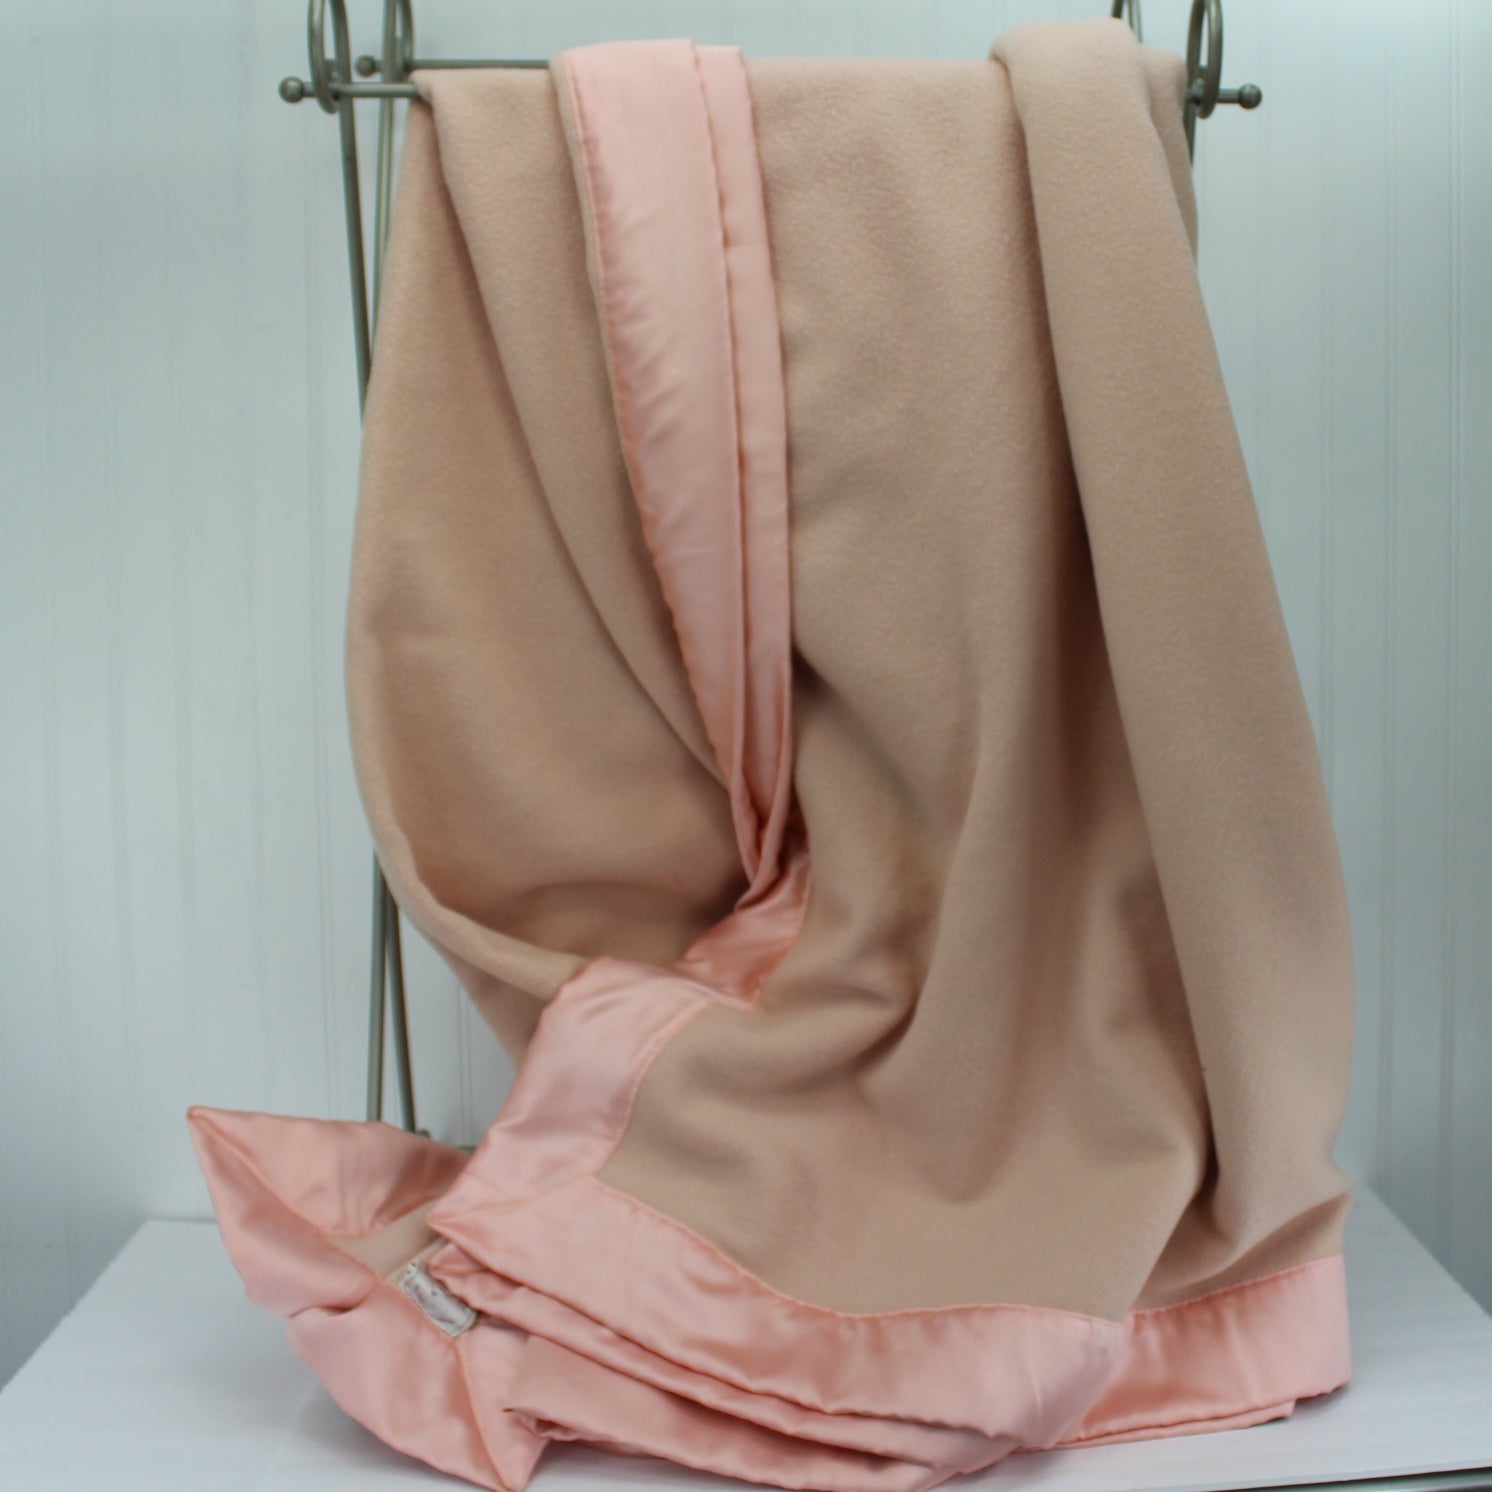 St Marys Ohio Wool Blanket Pale Pink Matching Binding All sides 98" X 82" soft heavy wool blanket